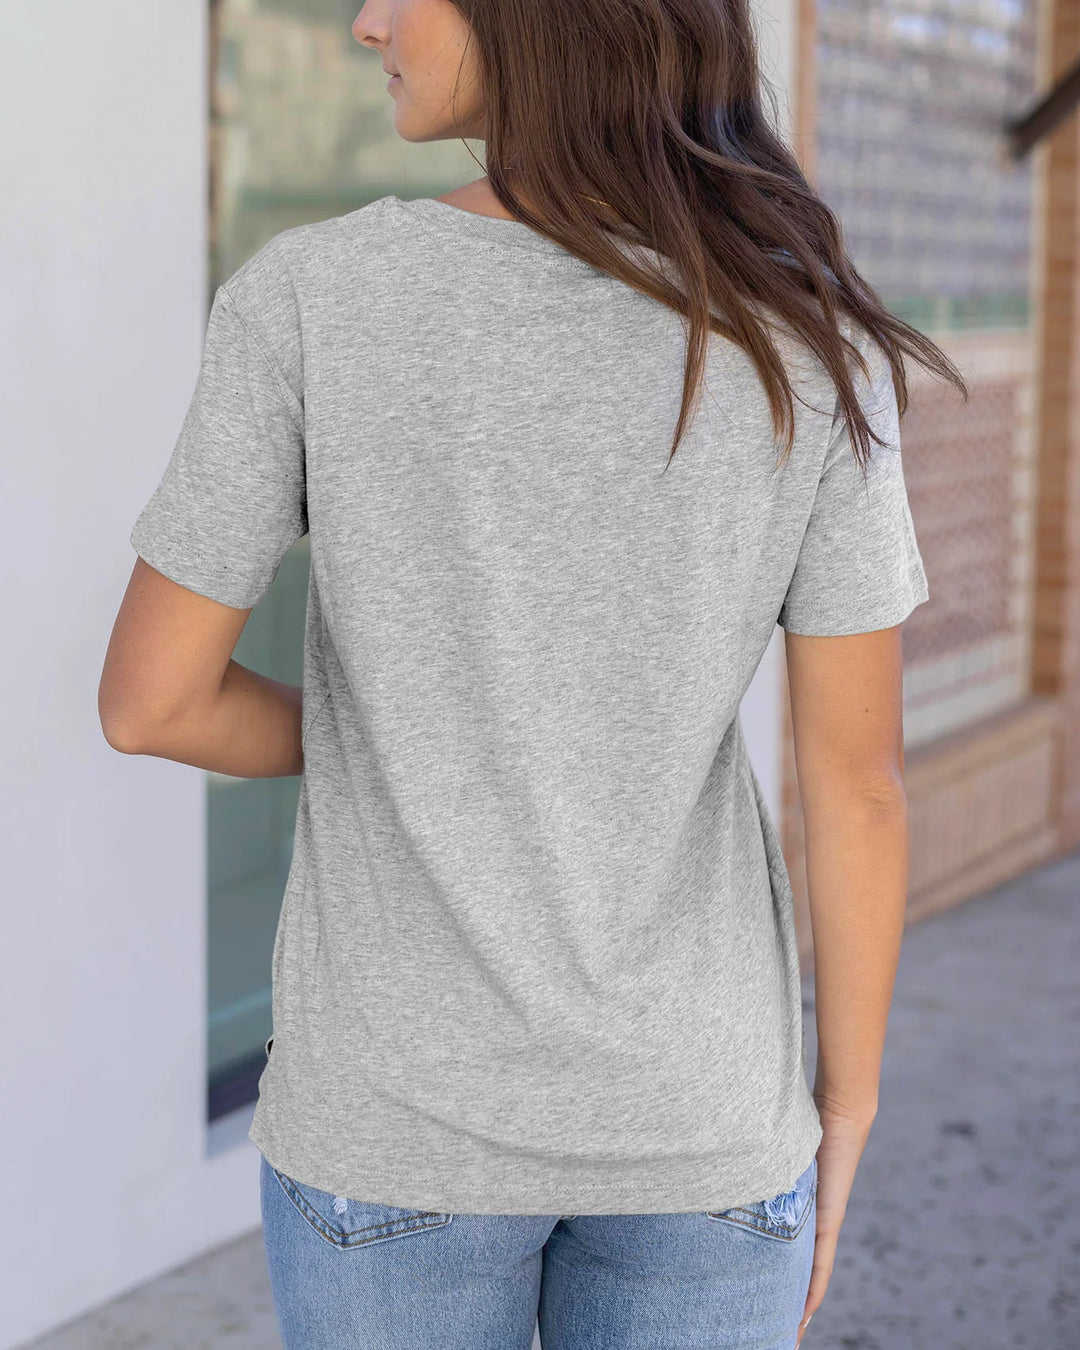 Grace and Lace | Vintage Fit Any Day Graphic Tee | Runners Club